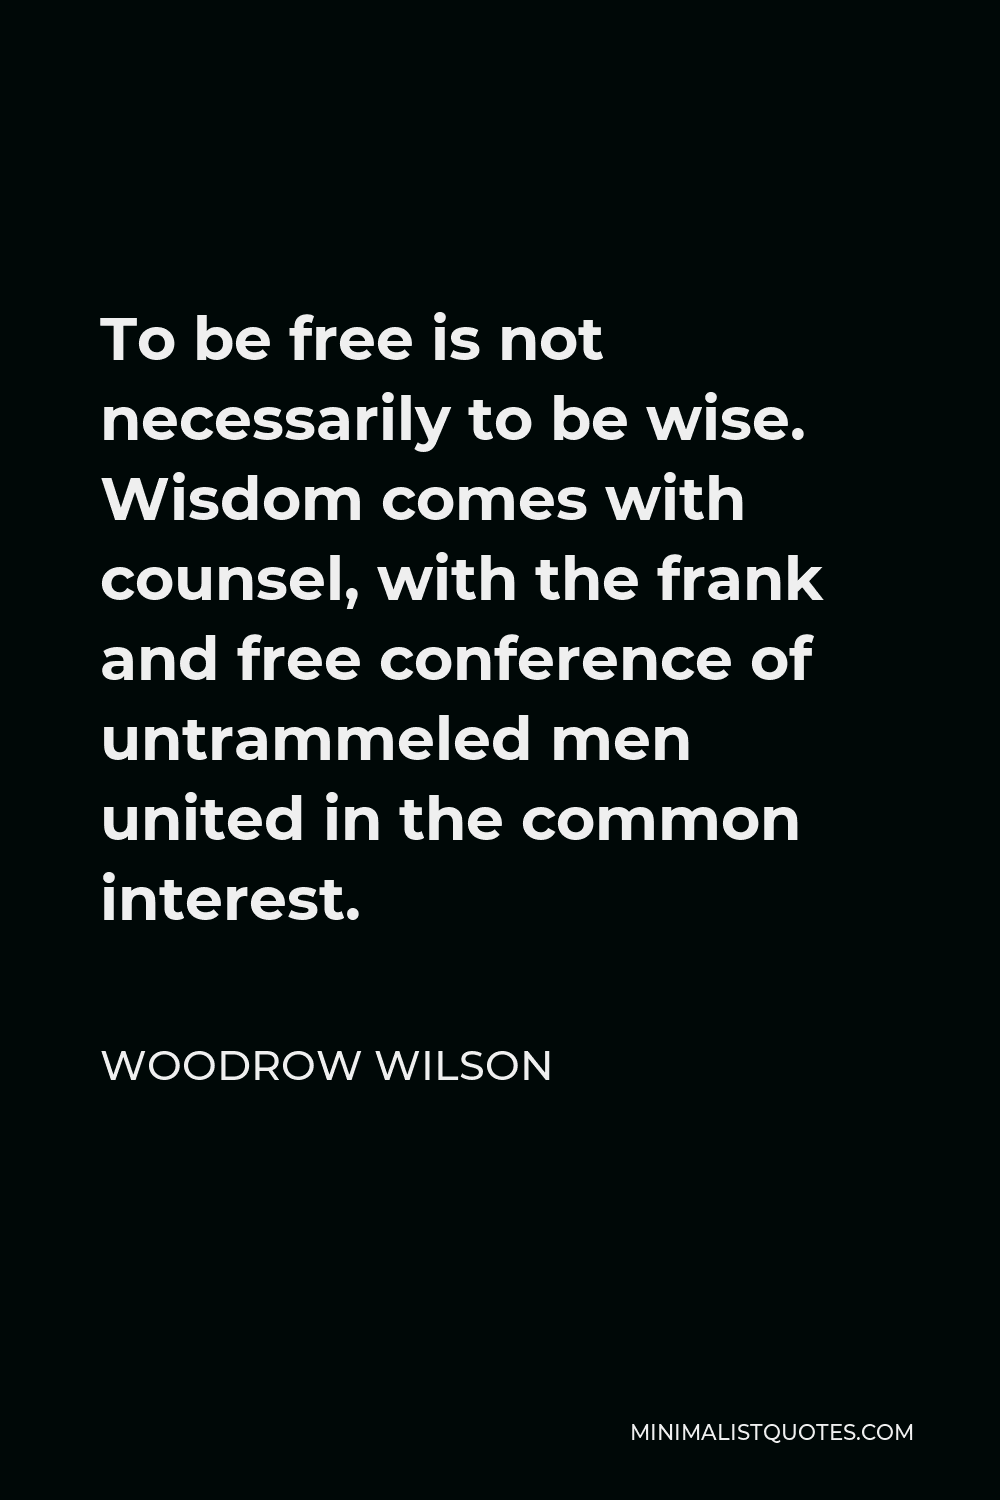 Woodrow Wilson Quote - To be free is not necessarily to be wise. Wisdom comes with counsel, with the frank and free conference of untrammeled men united in the common interest.